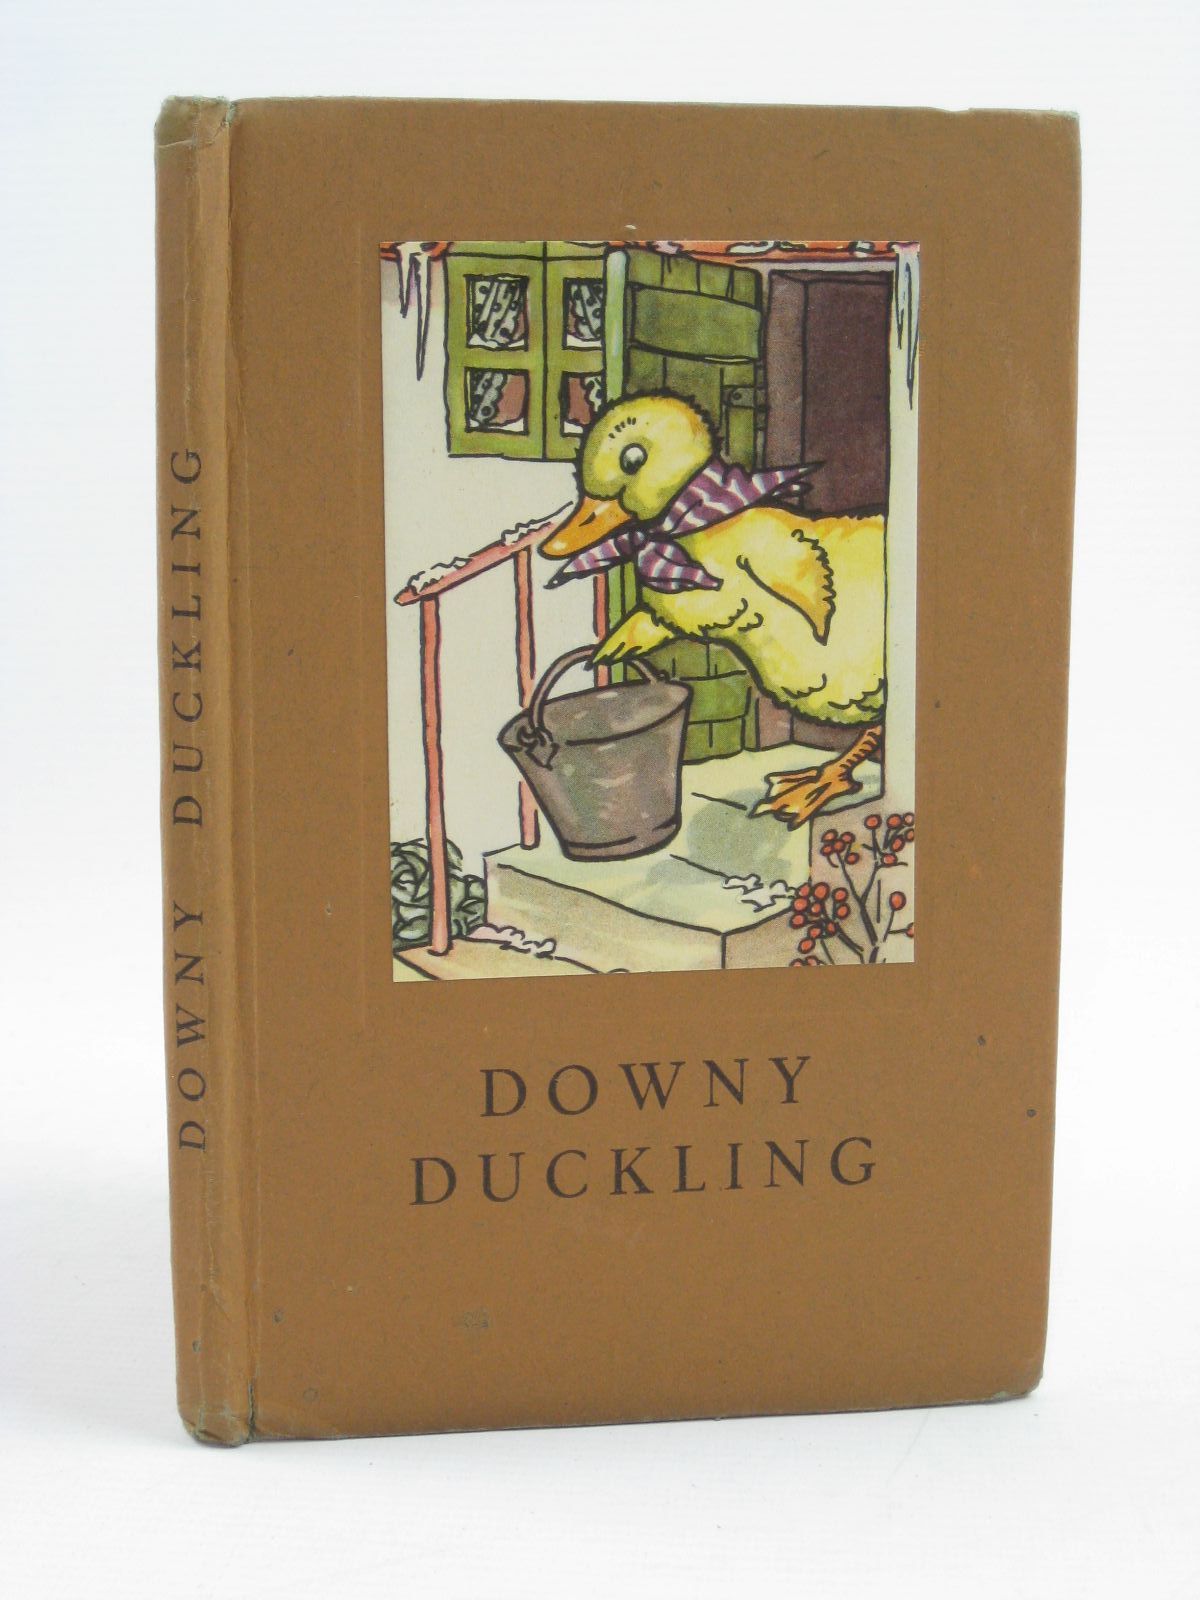 Photo of DOWNY DUCKLING written by Macgregor, A.J.
Perring, W. illustrated by Macgregor, A.J. published by Wills & Hepworth Ltd. (STOCK CODE: 1406986)  for sale by Stella & Rose's Books